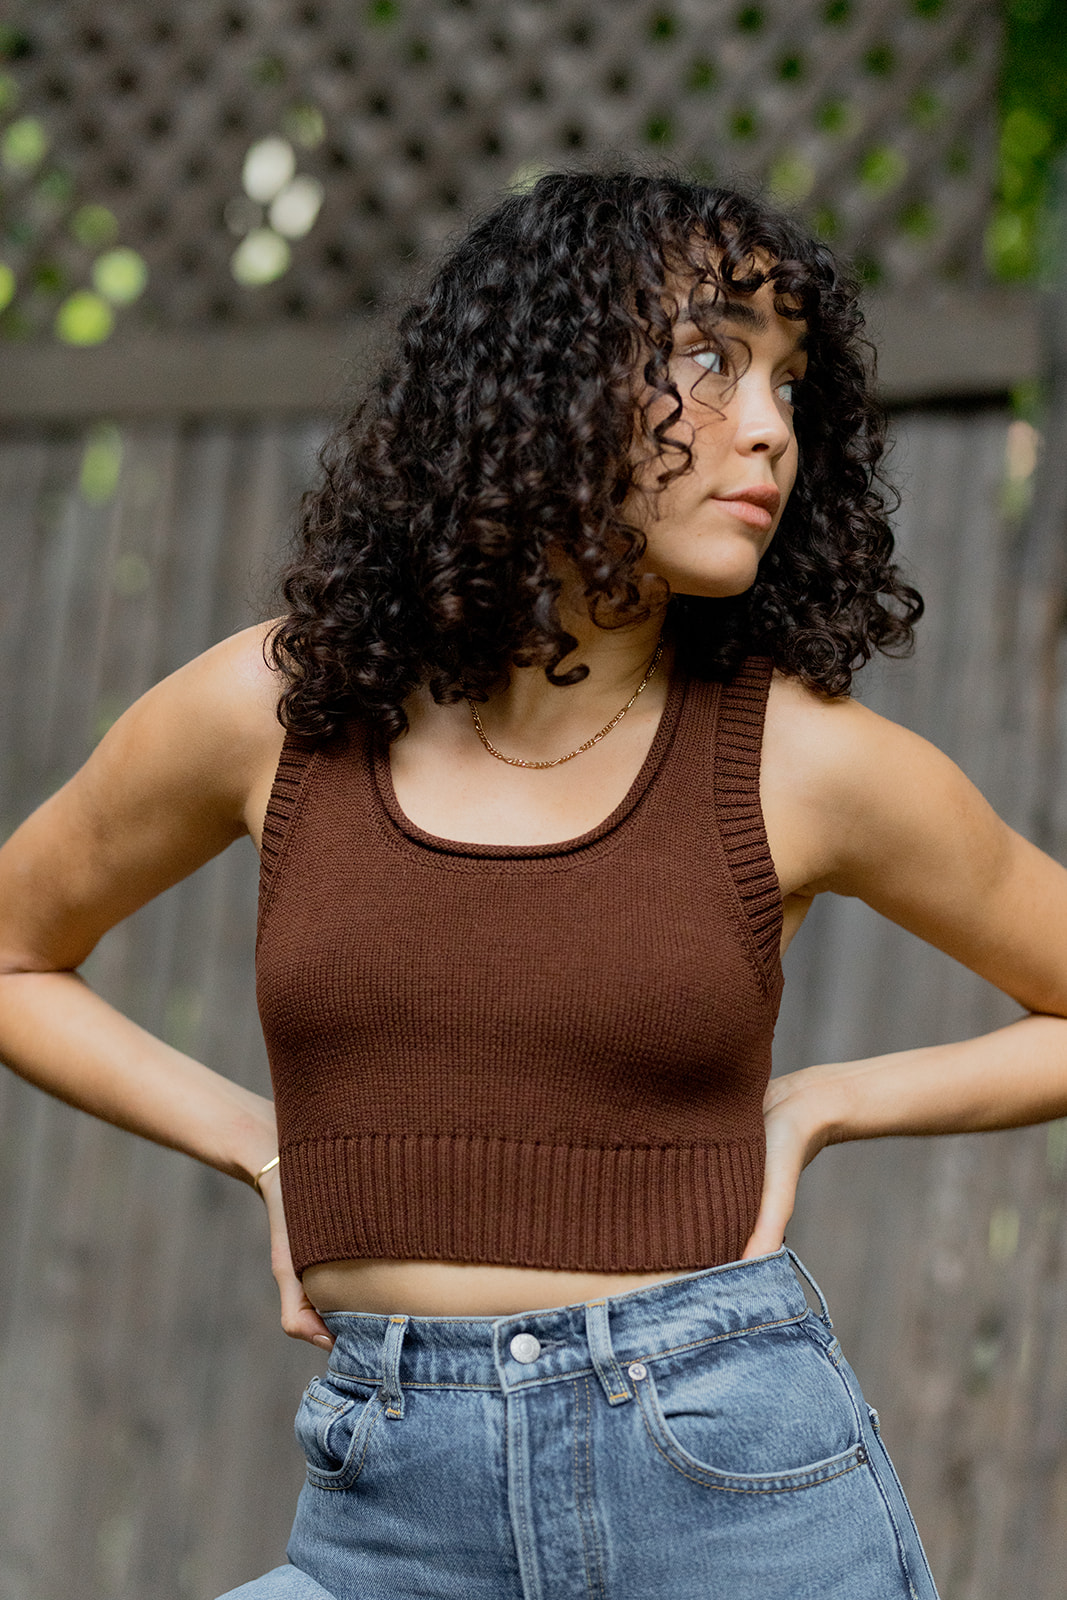 A woman with curly hair wearing a brown tank top and blue jeans standing with hands on hips.